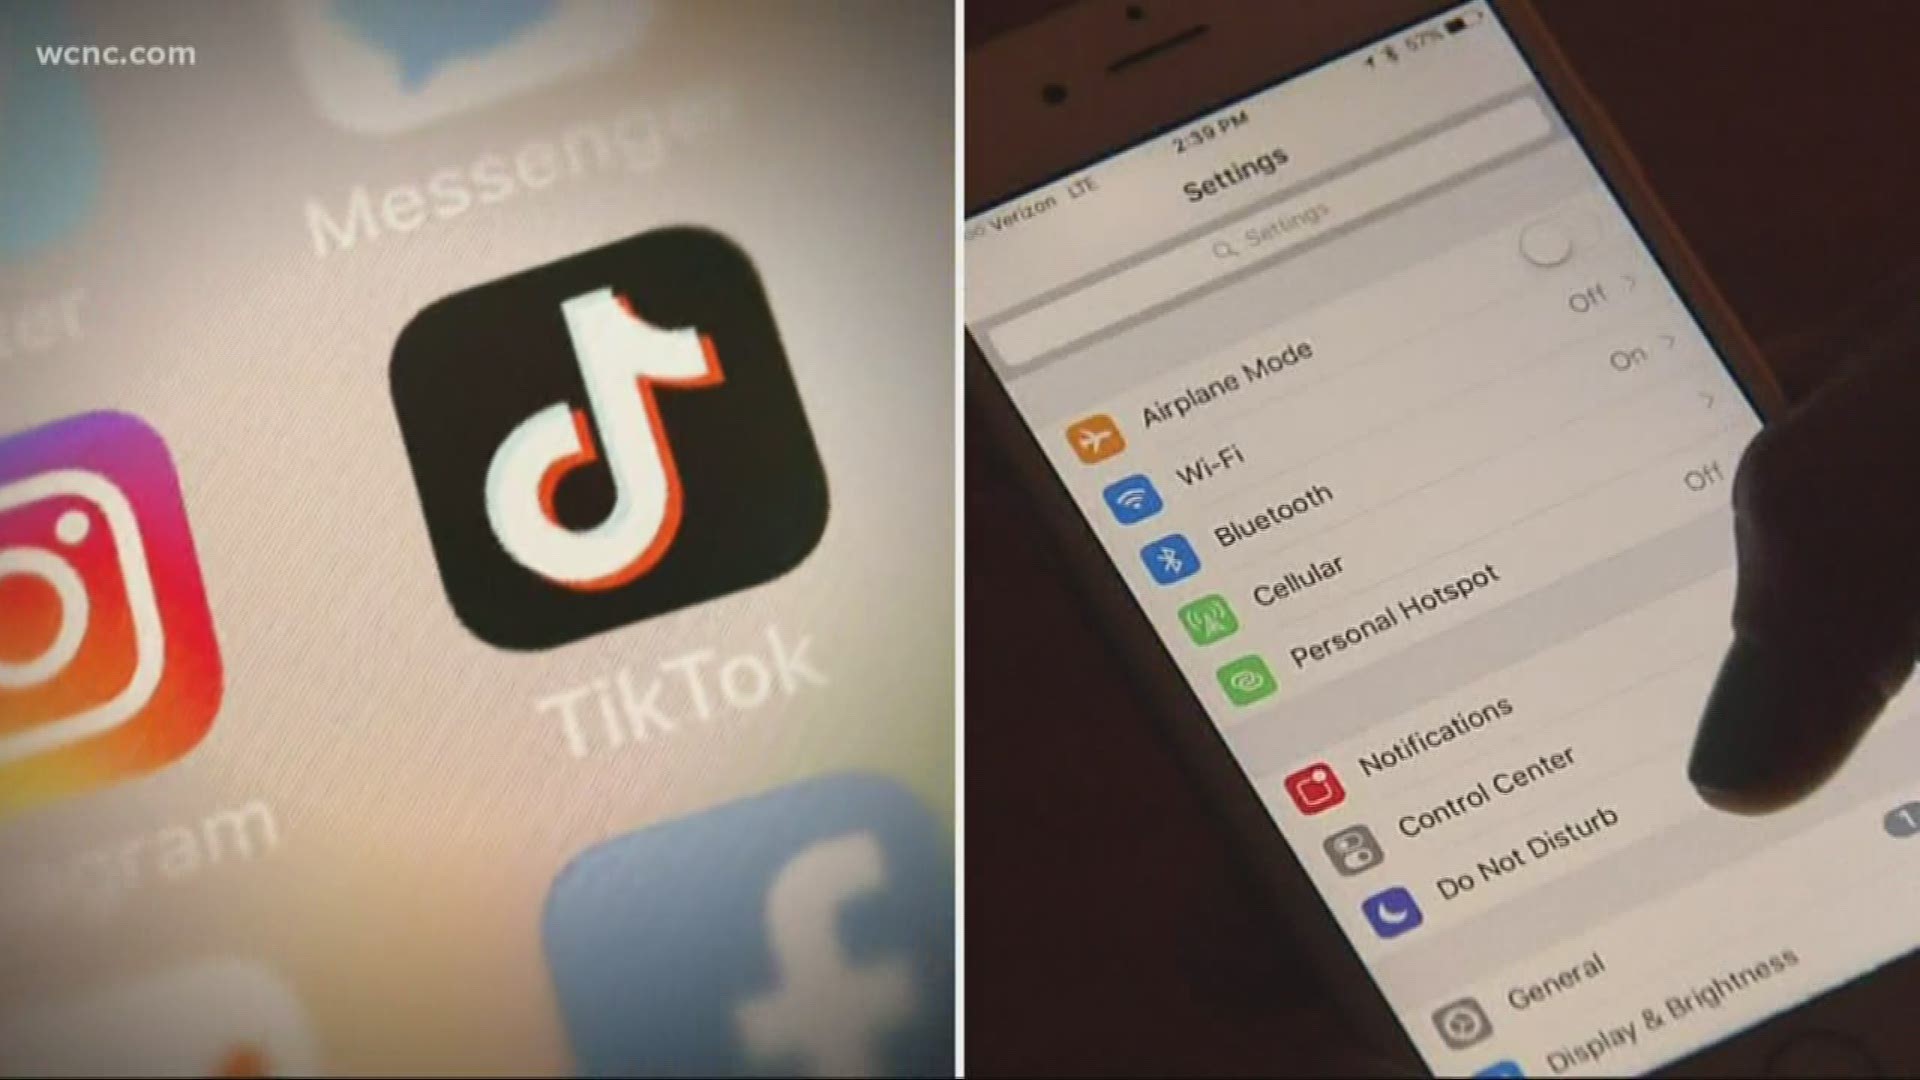 Tik Tok is one of the most downloaded apps, and it's especially popular among kids and teens. But it comes with a slew of privacy concerns.